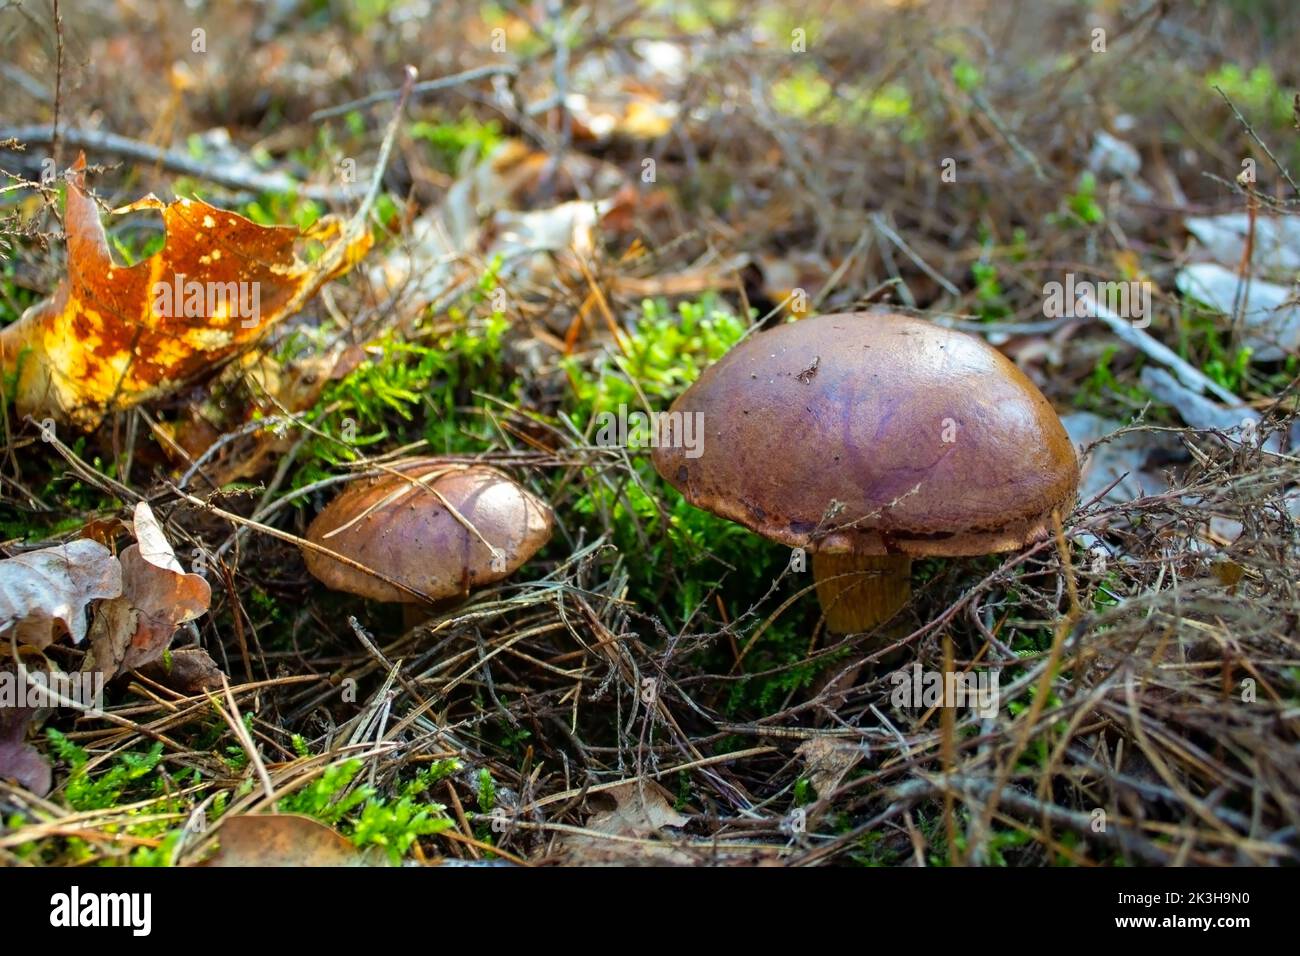 Mushroom season in the forest. Two boletus grew in the grass. Autumn season to pick mushrooms. Healthy vegetarian food growing in nature. Stock Photo